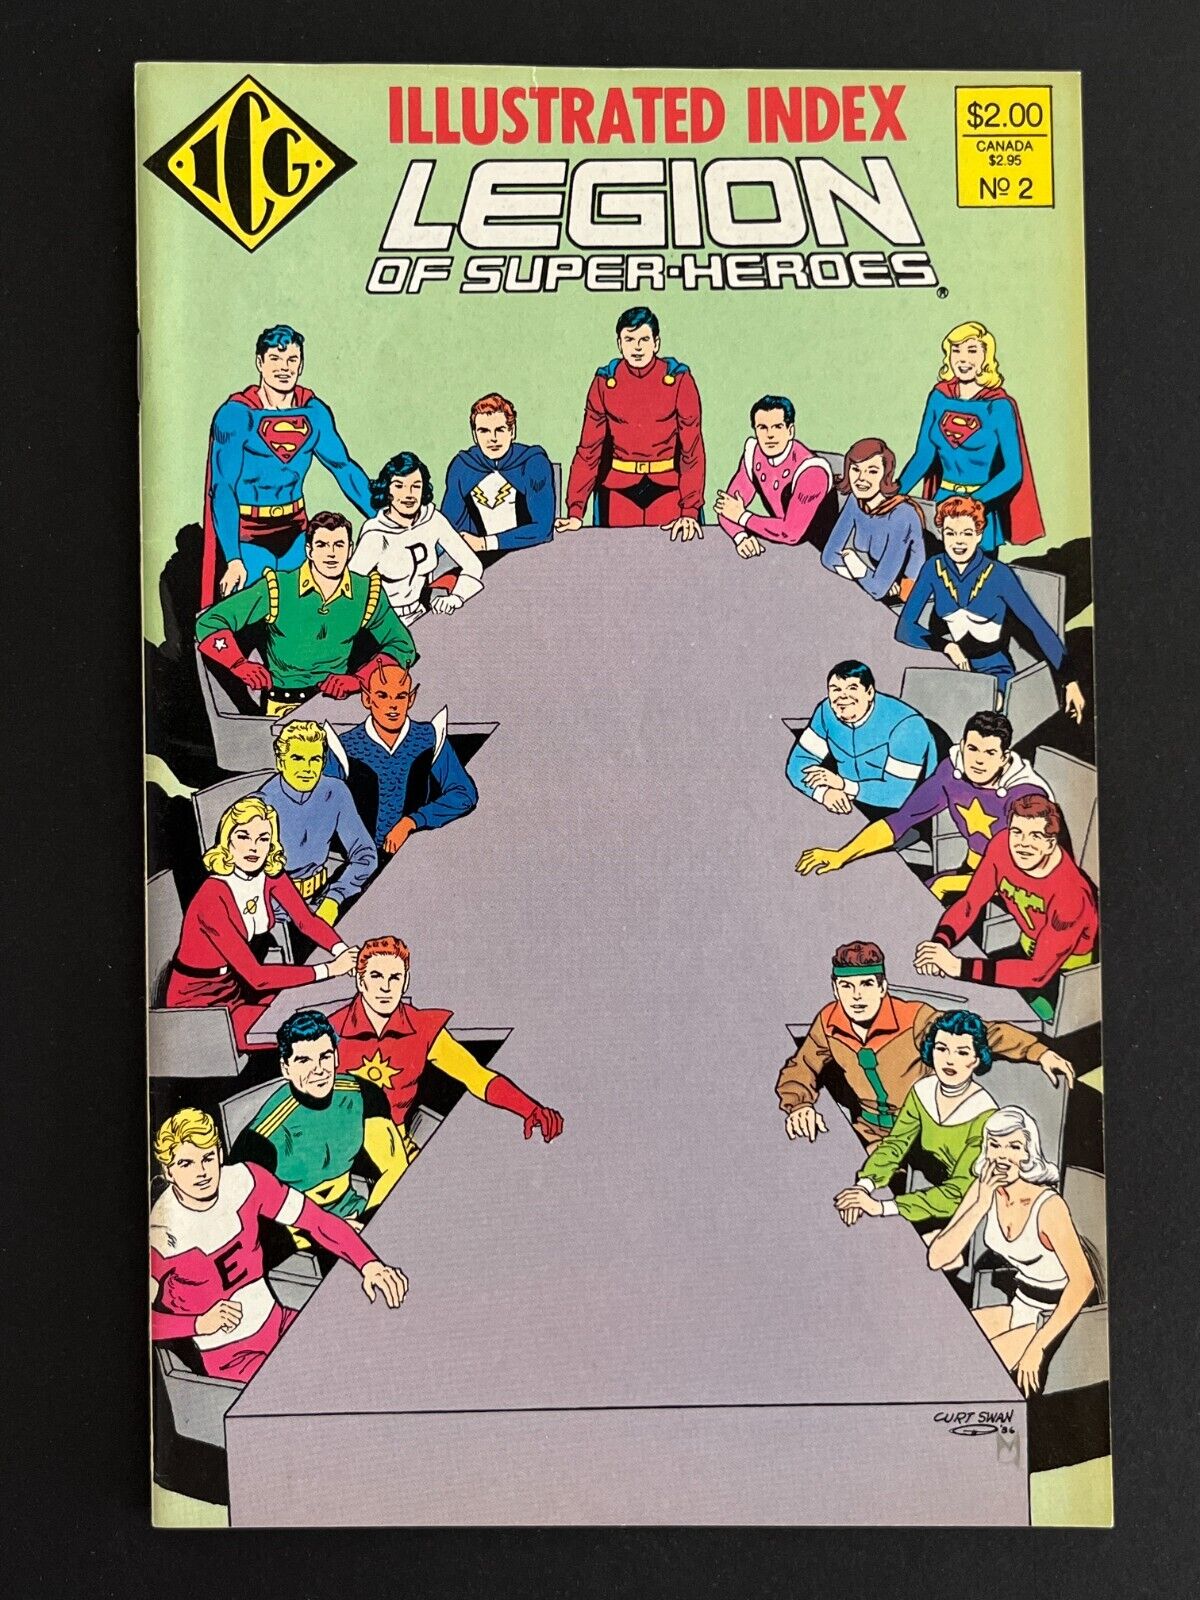 The Official Legion of Super-Heroes Index #2 (Eclipse/ICG, 1987, Curt Swan art)